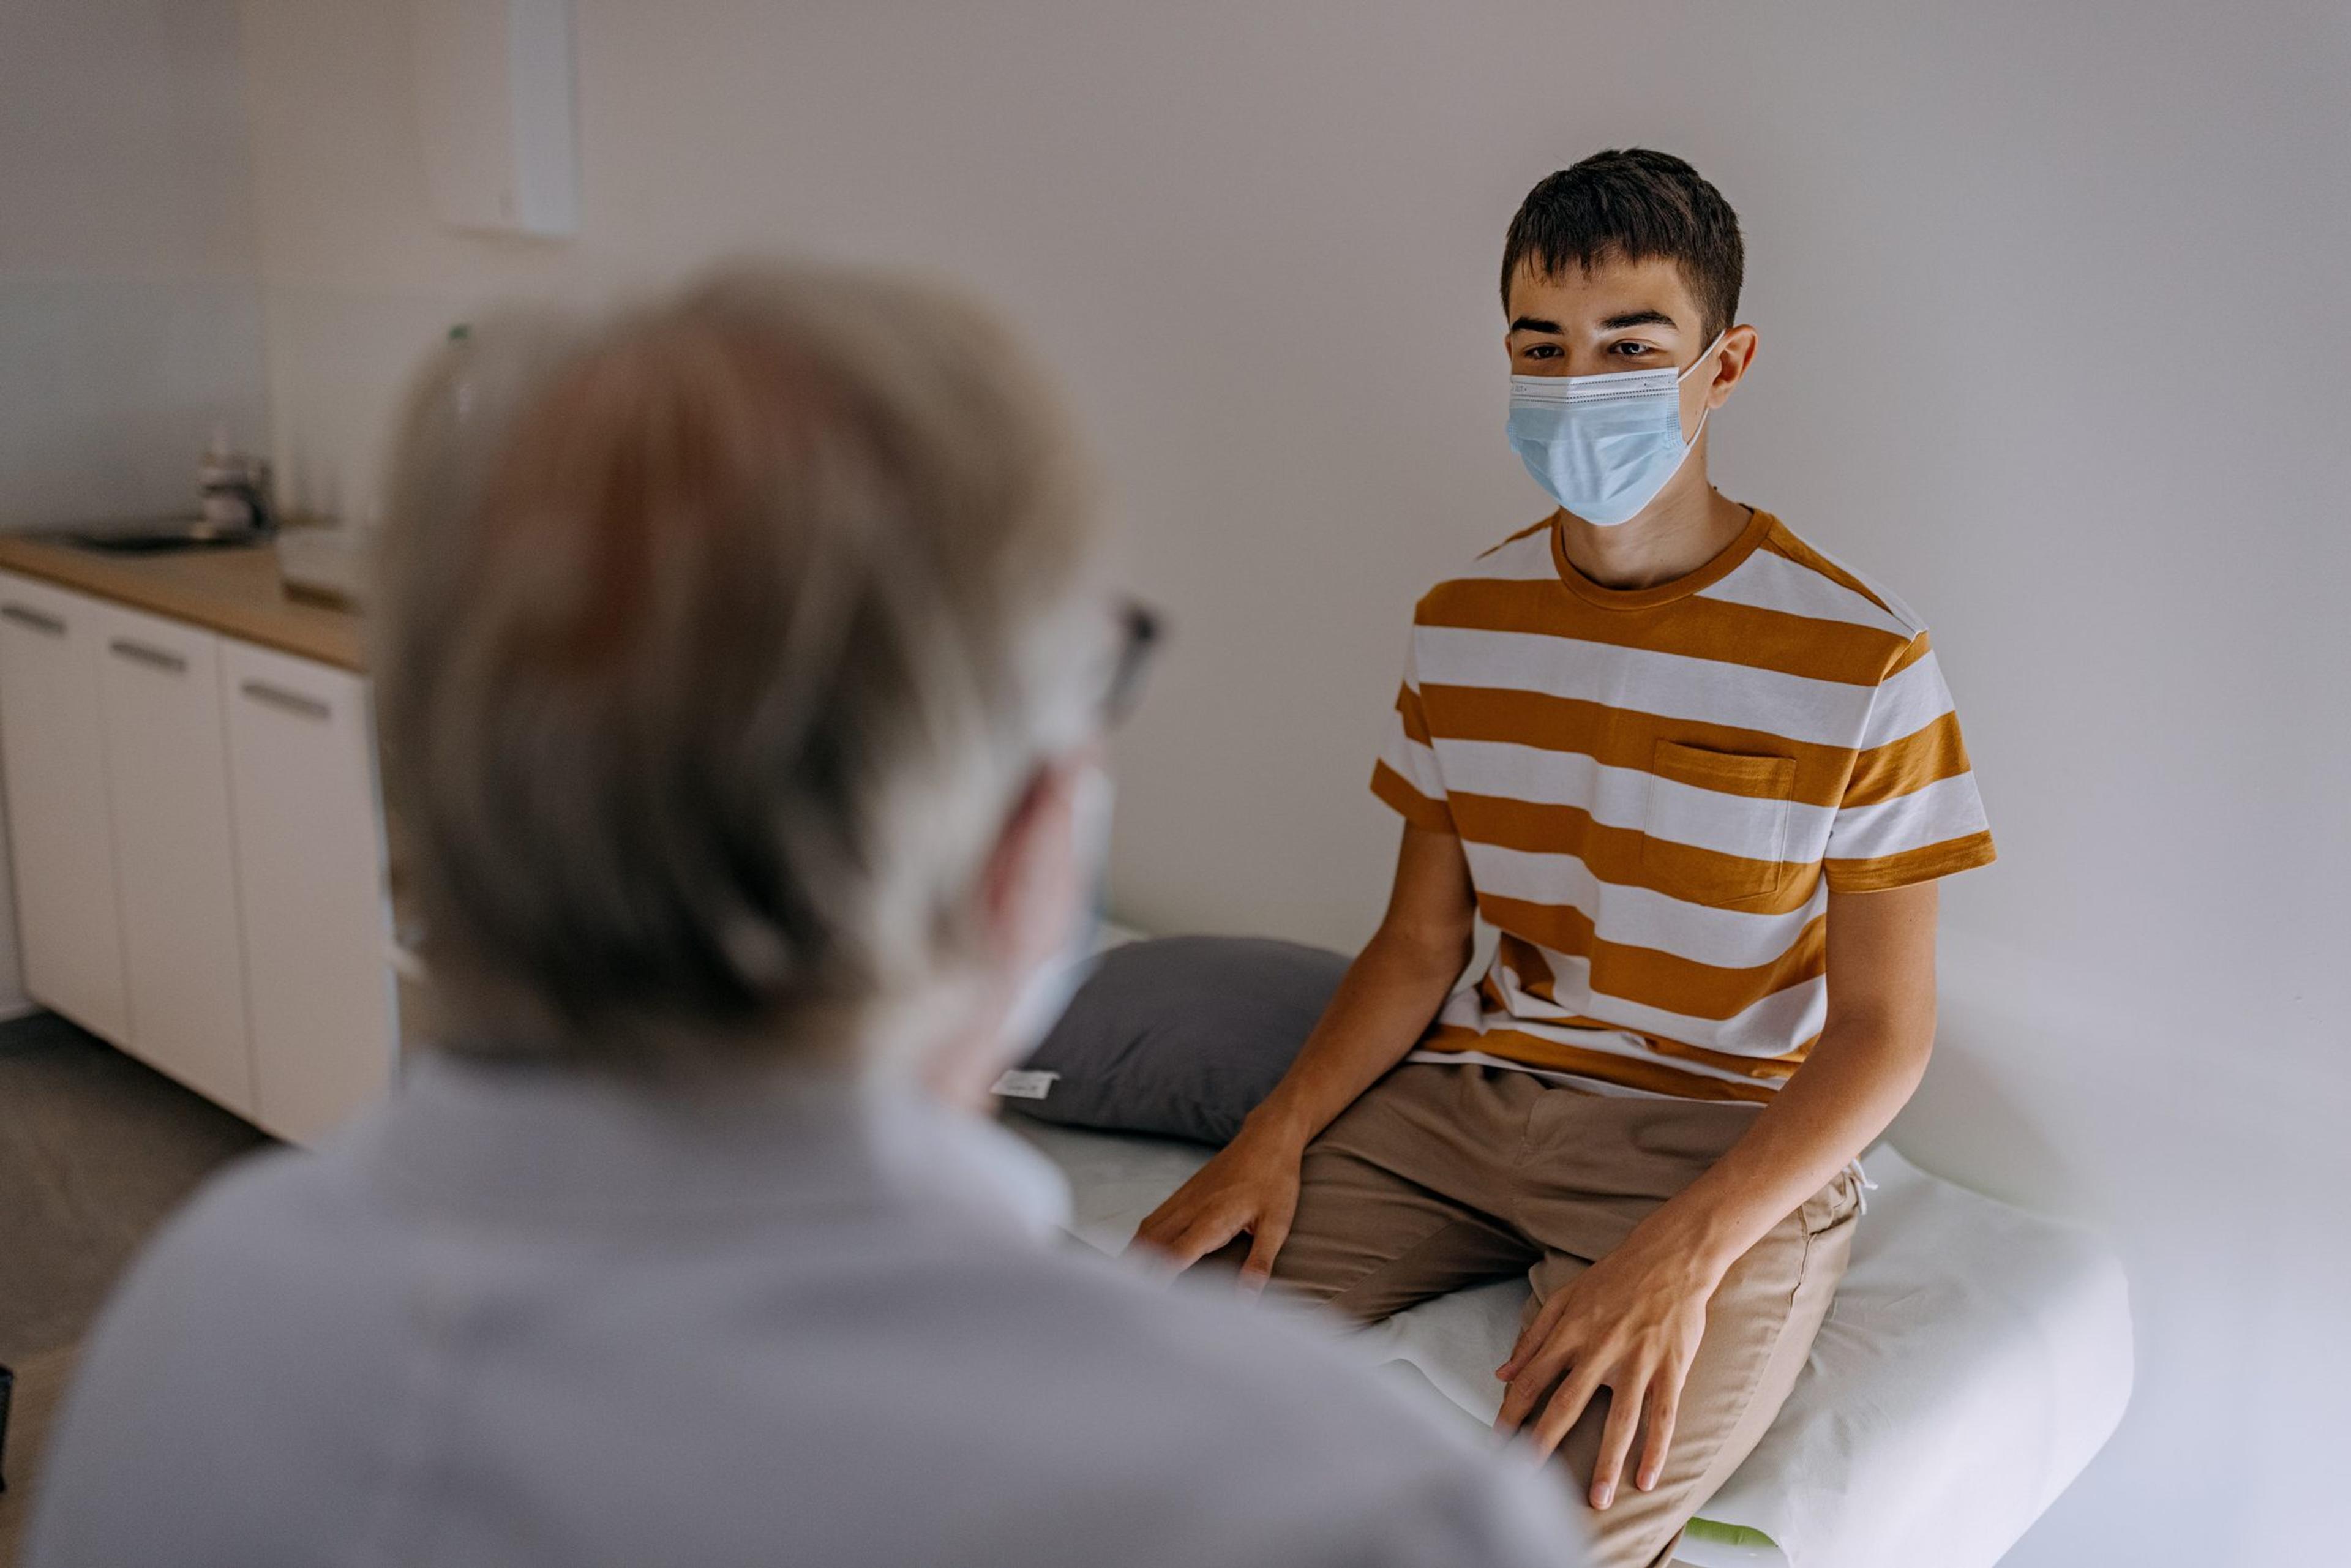 Doctor at hospital wearing mask taking care of young patient